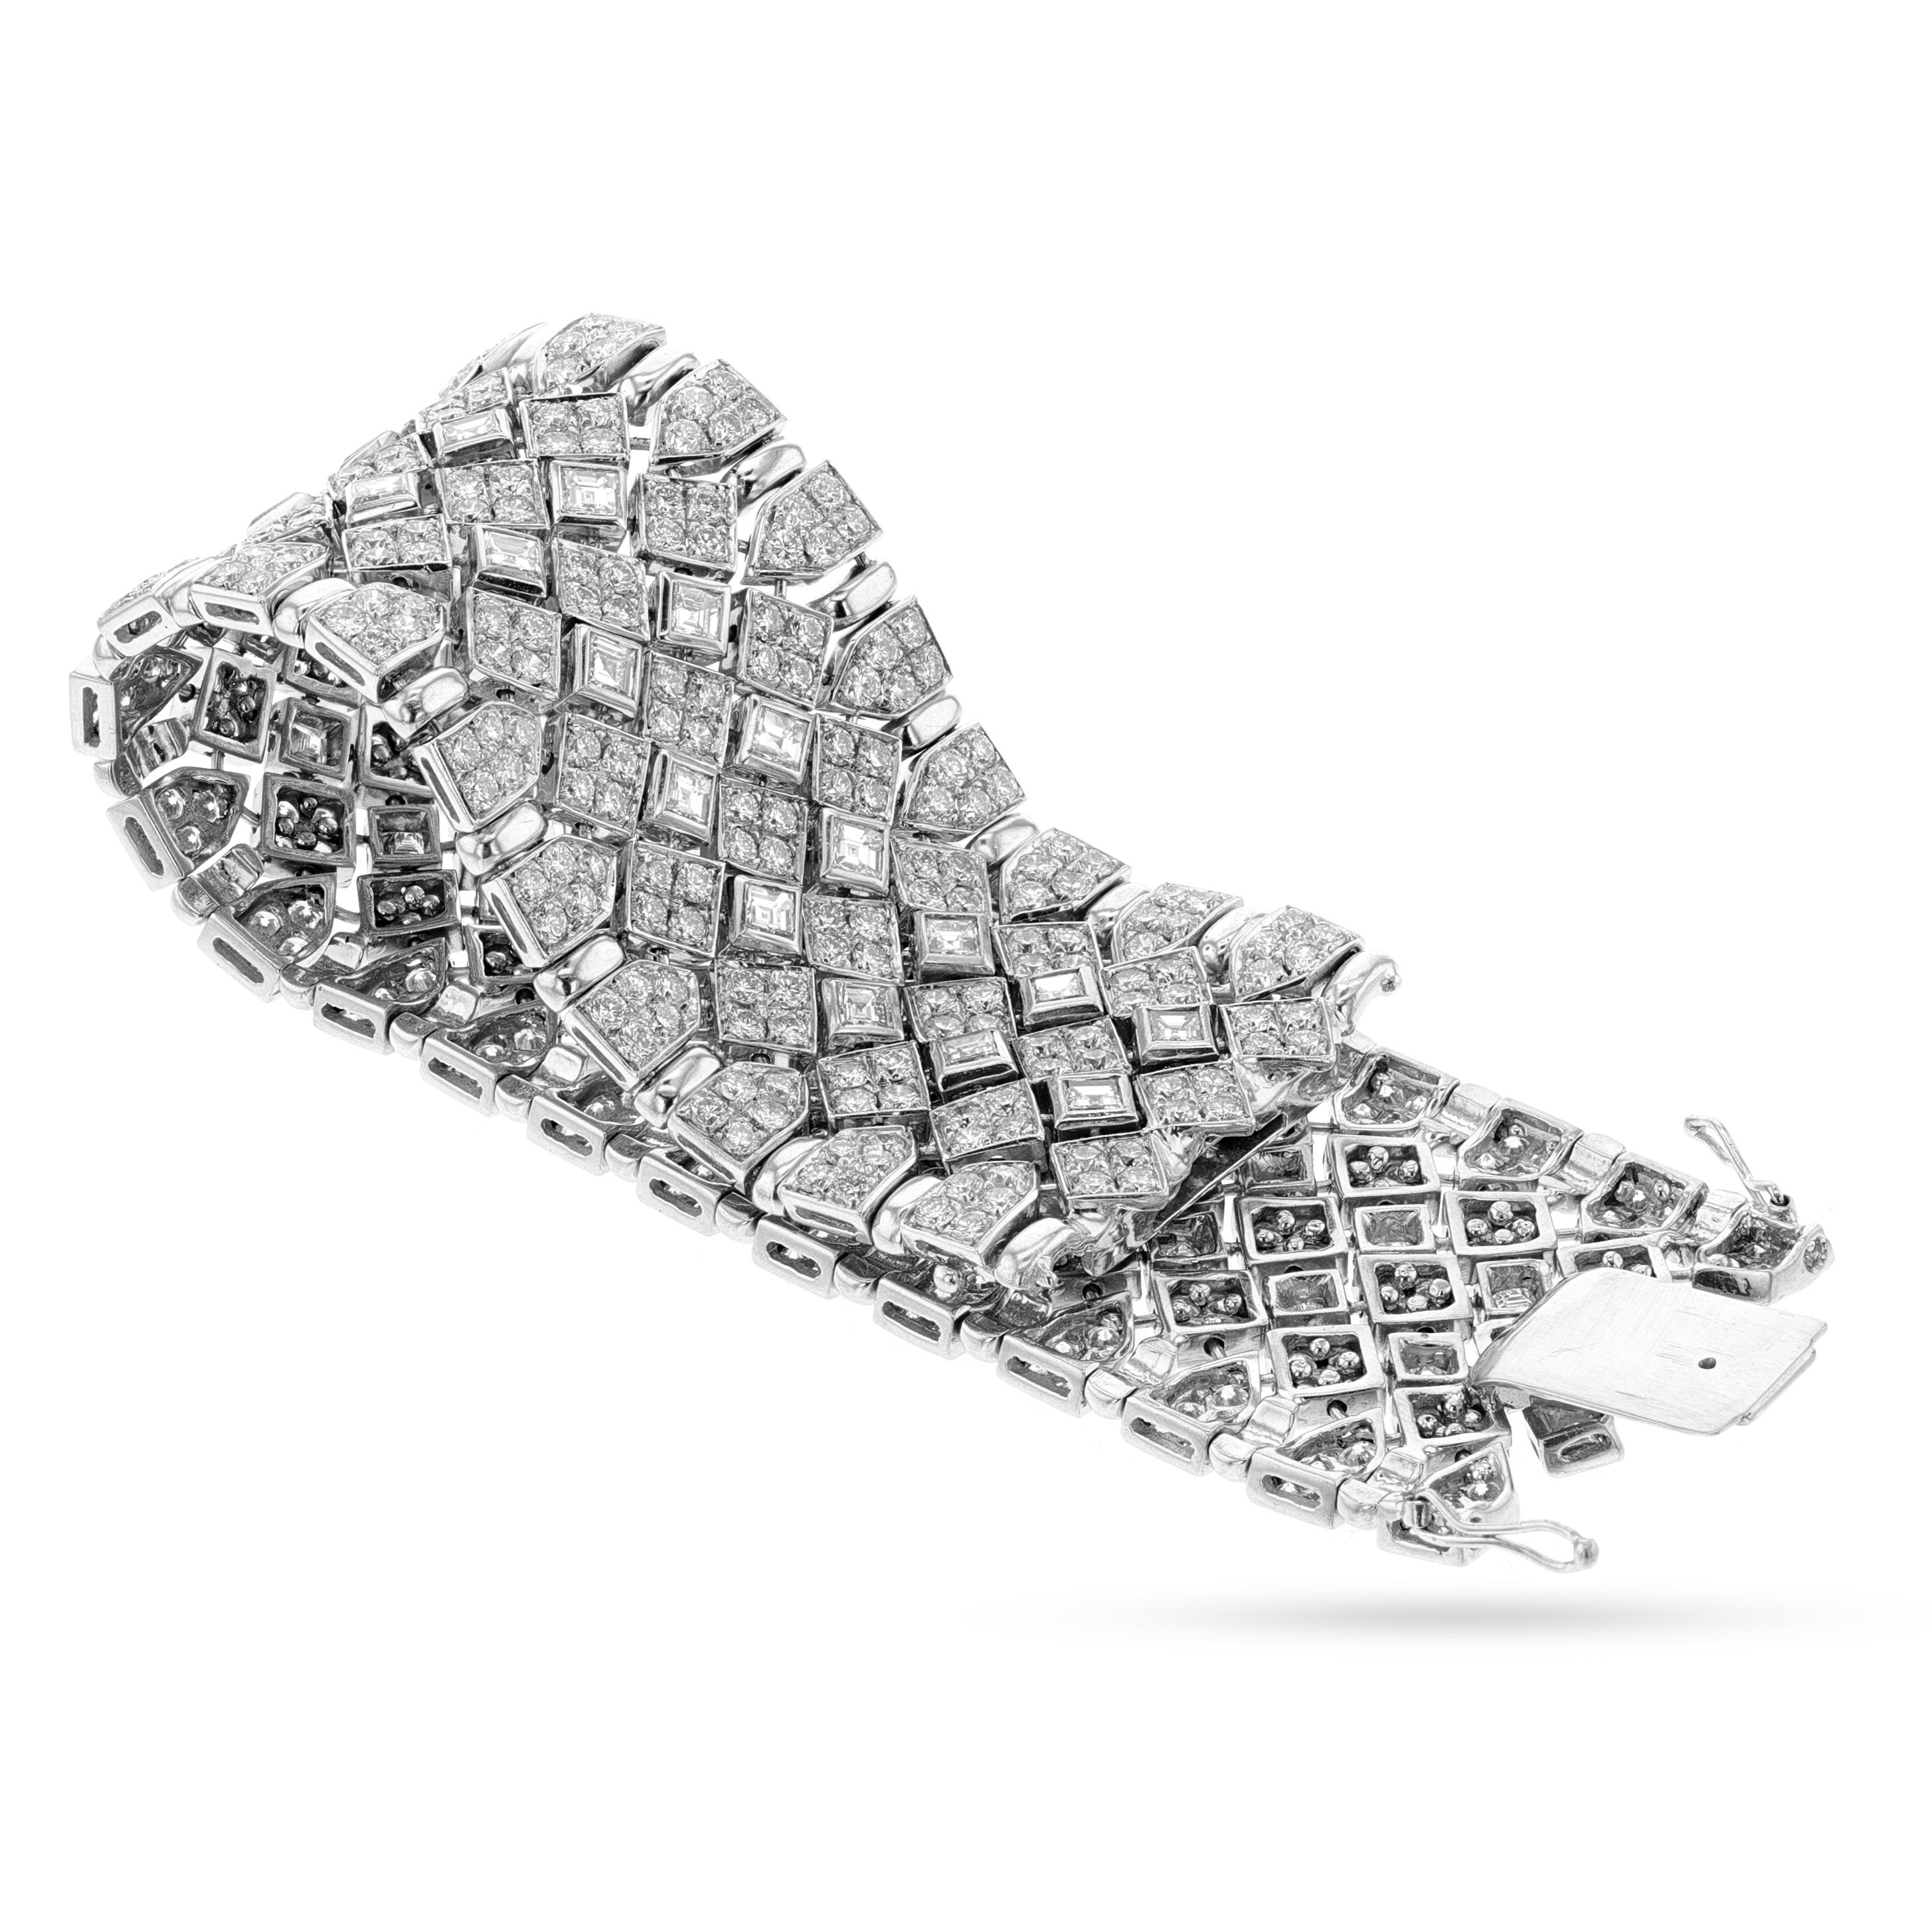 In the realm of elegance and opulence, there exists a radiant jewel that commands attention and captivates hearts—a breathtaking creation known as the Bulgari Diamond Bracelet. This exquisite piece of artistry embraces the wrist with a wide strap,